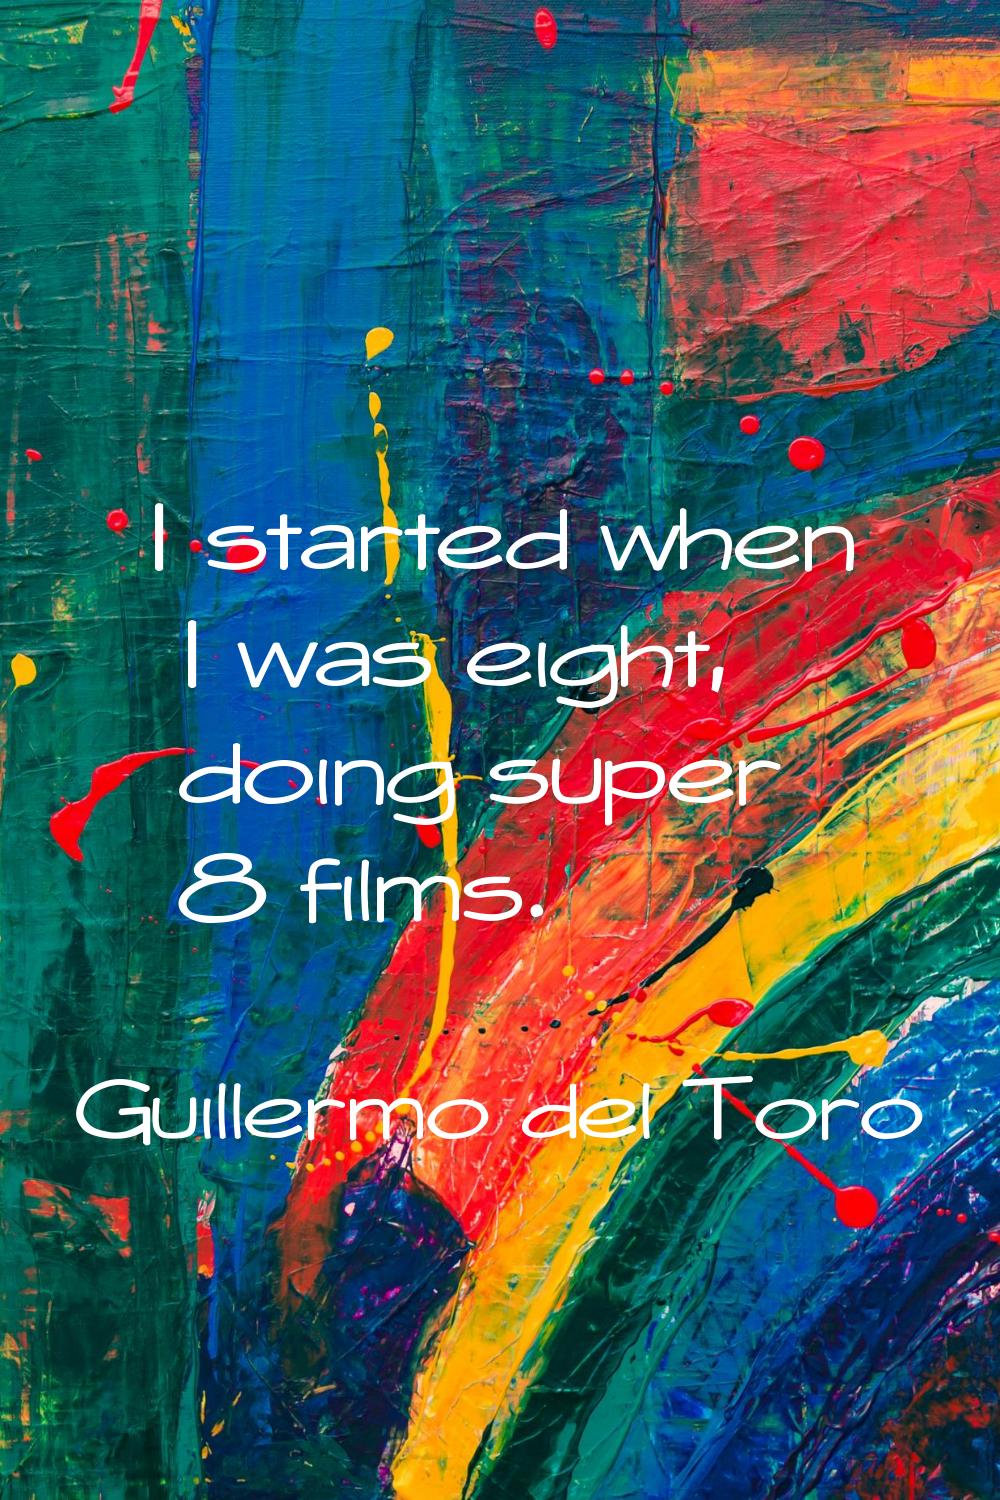 I started when I was eight, doing super 8 films.